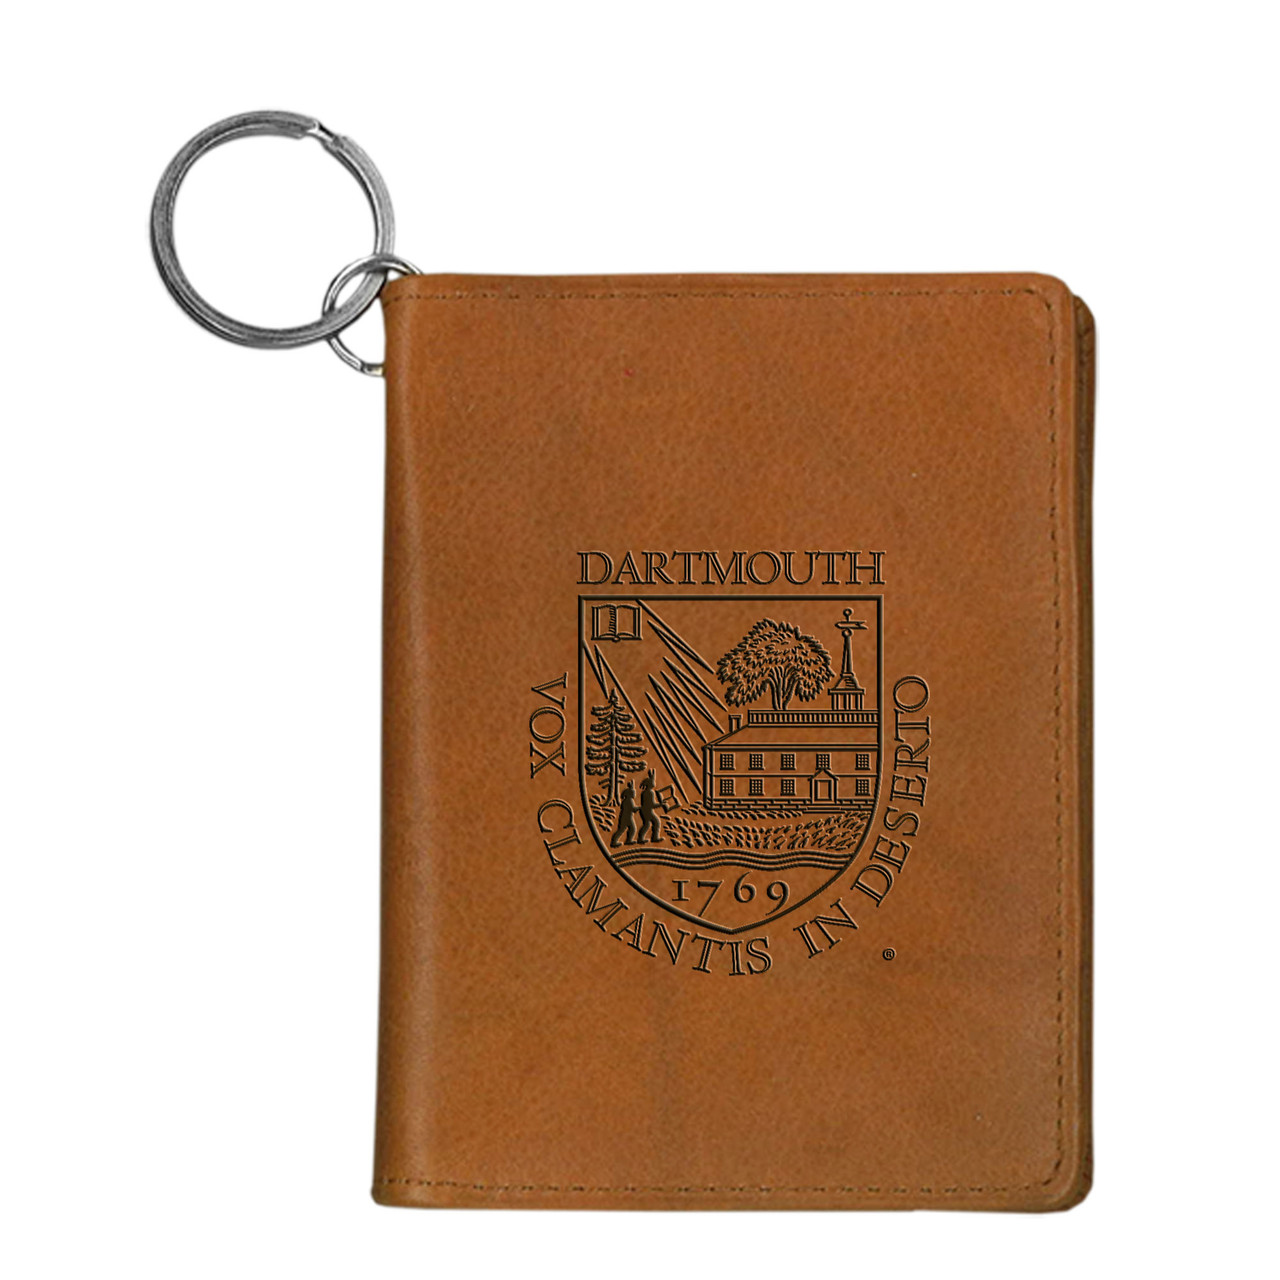 ID HOLDER LEATHER  The University Store on Fifth